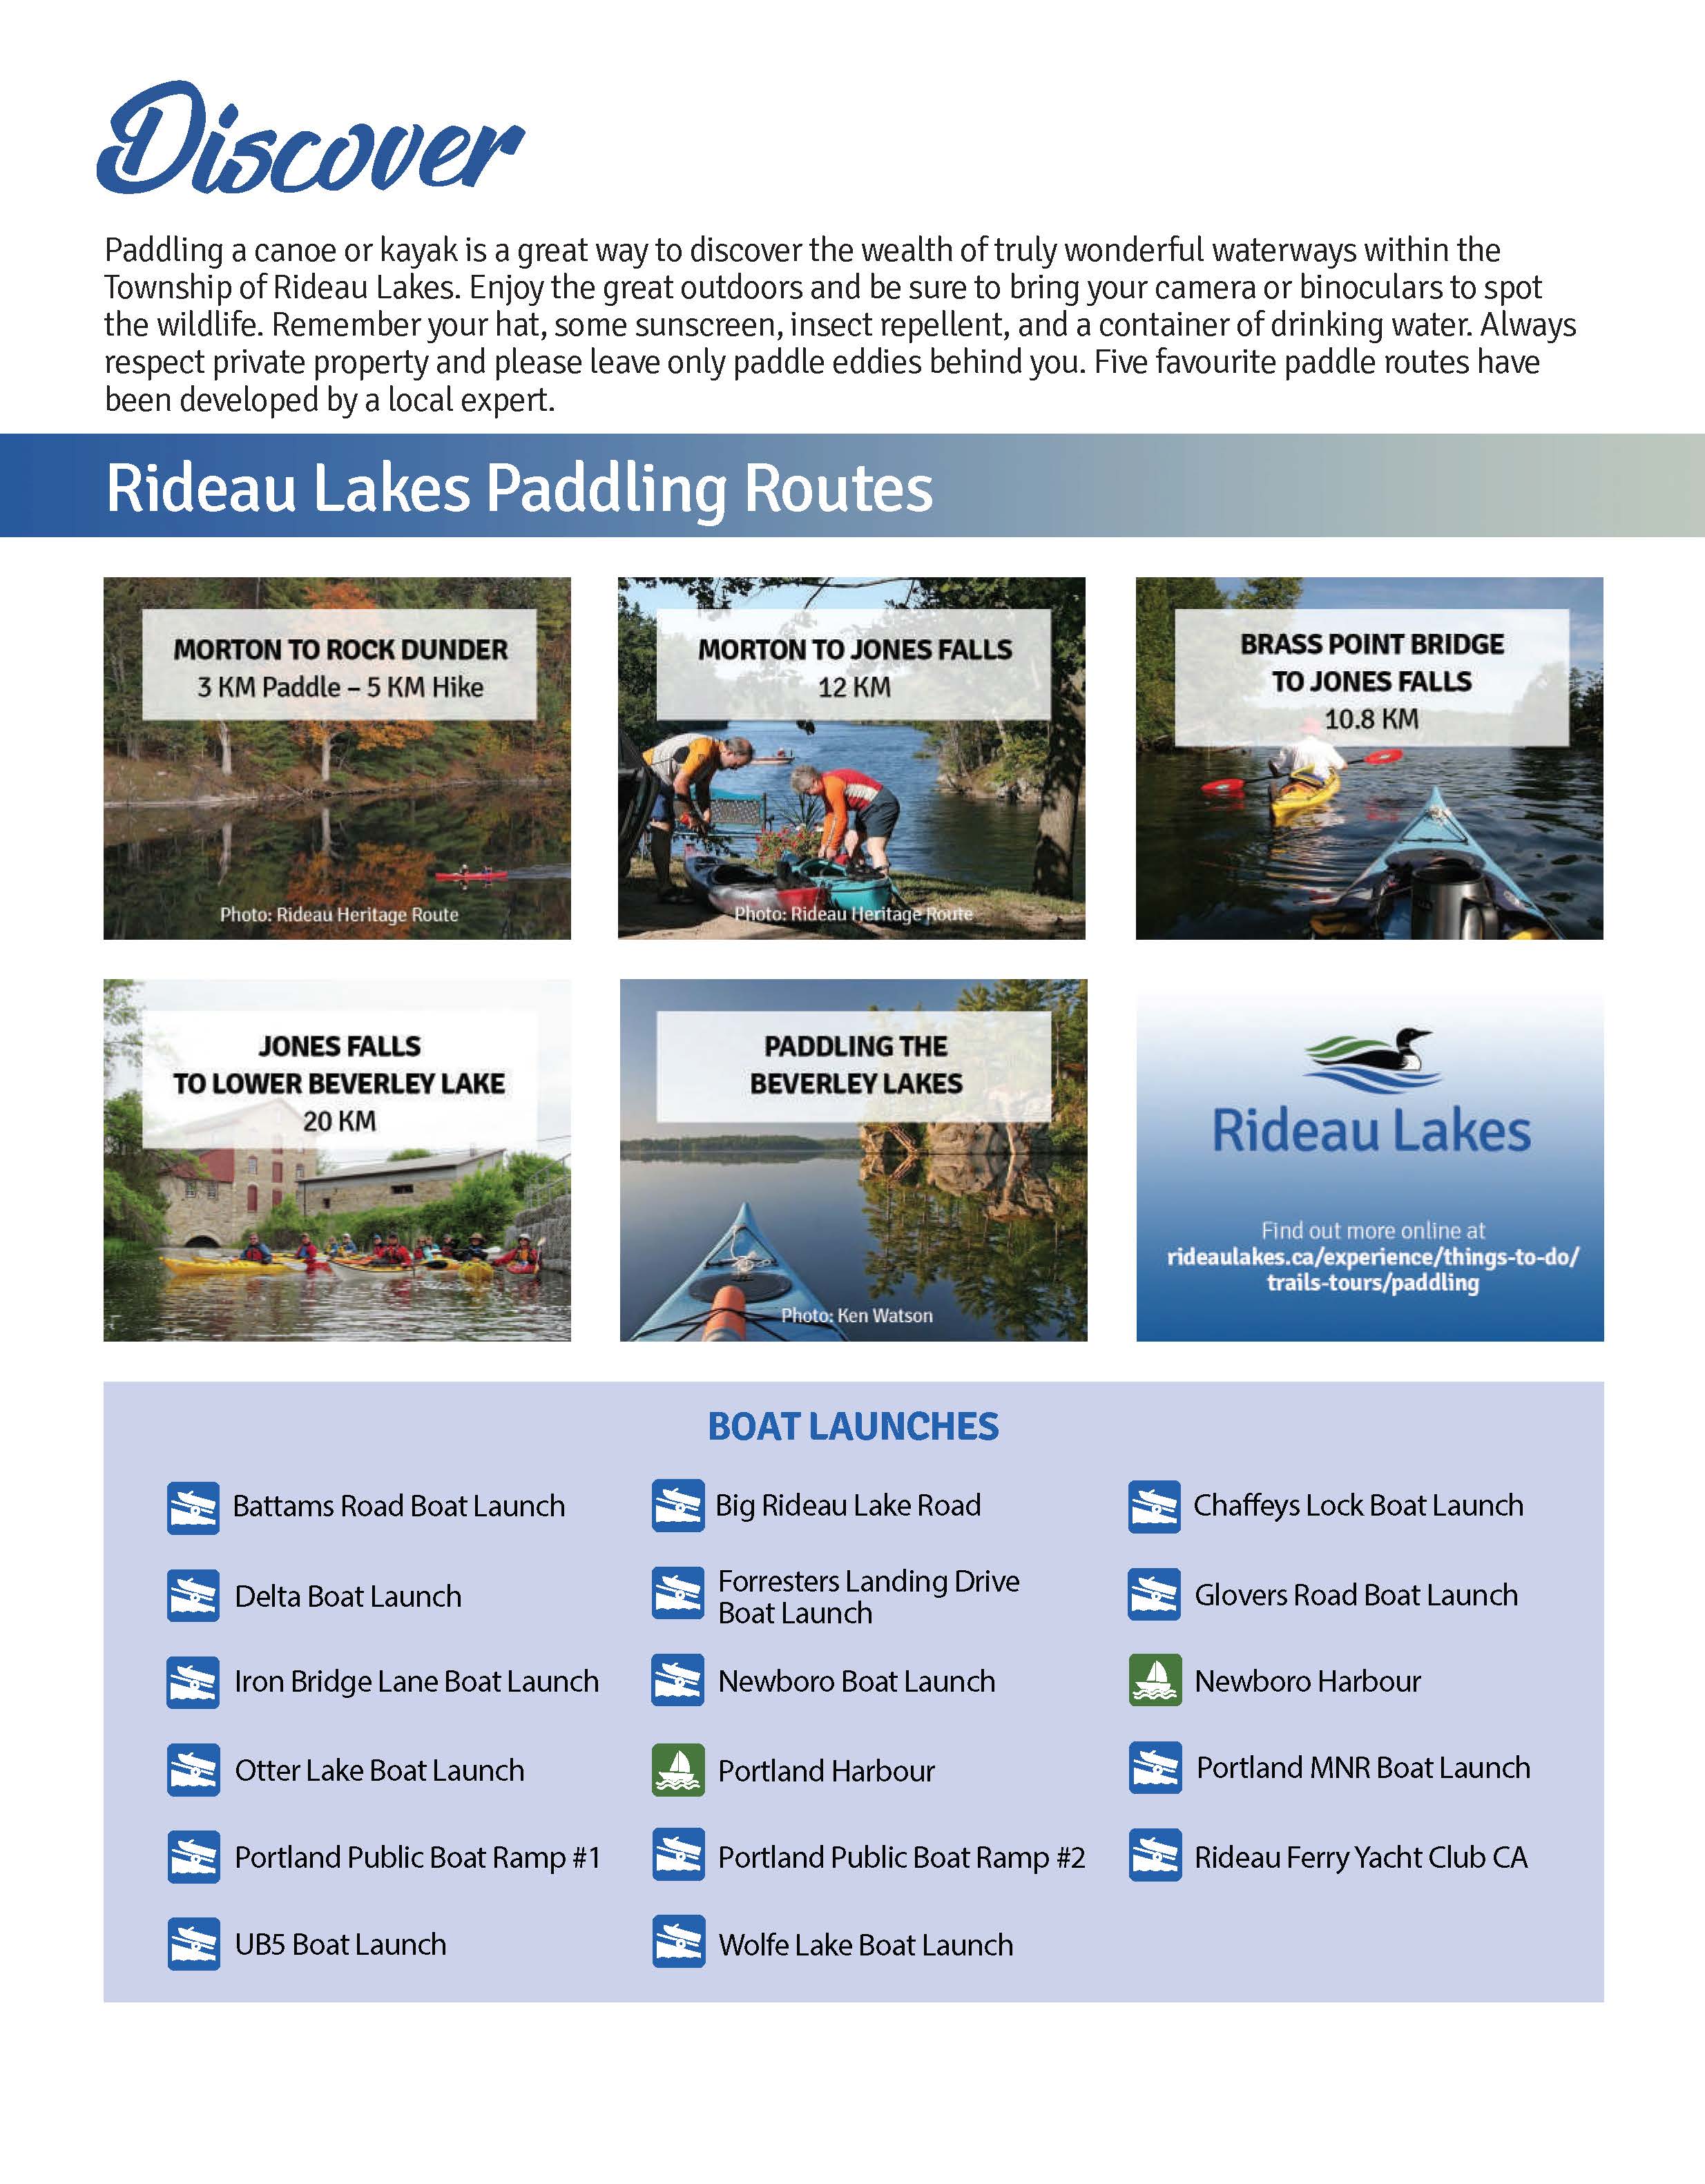 6 Final Paddling Discover Rideau Lakes Business and Heritage Tour 2022 Picnic Guide